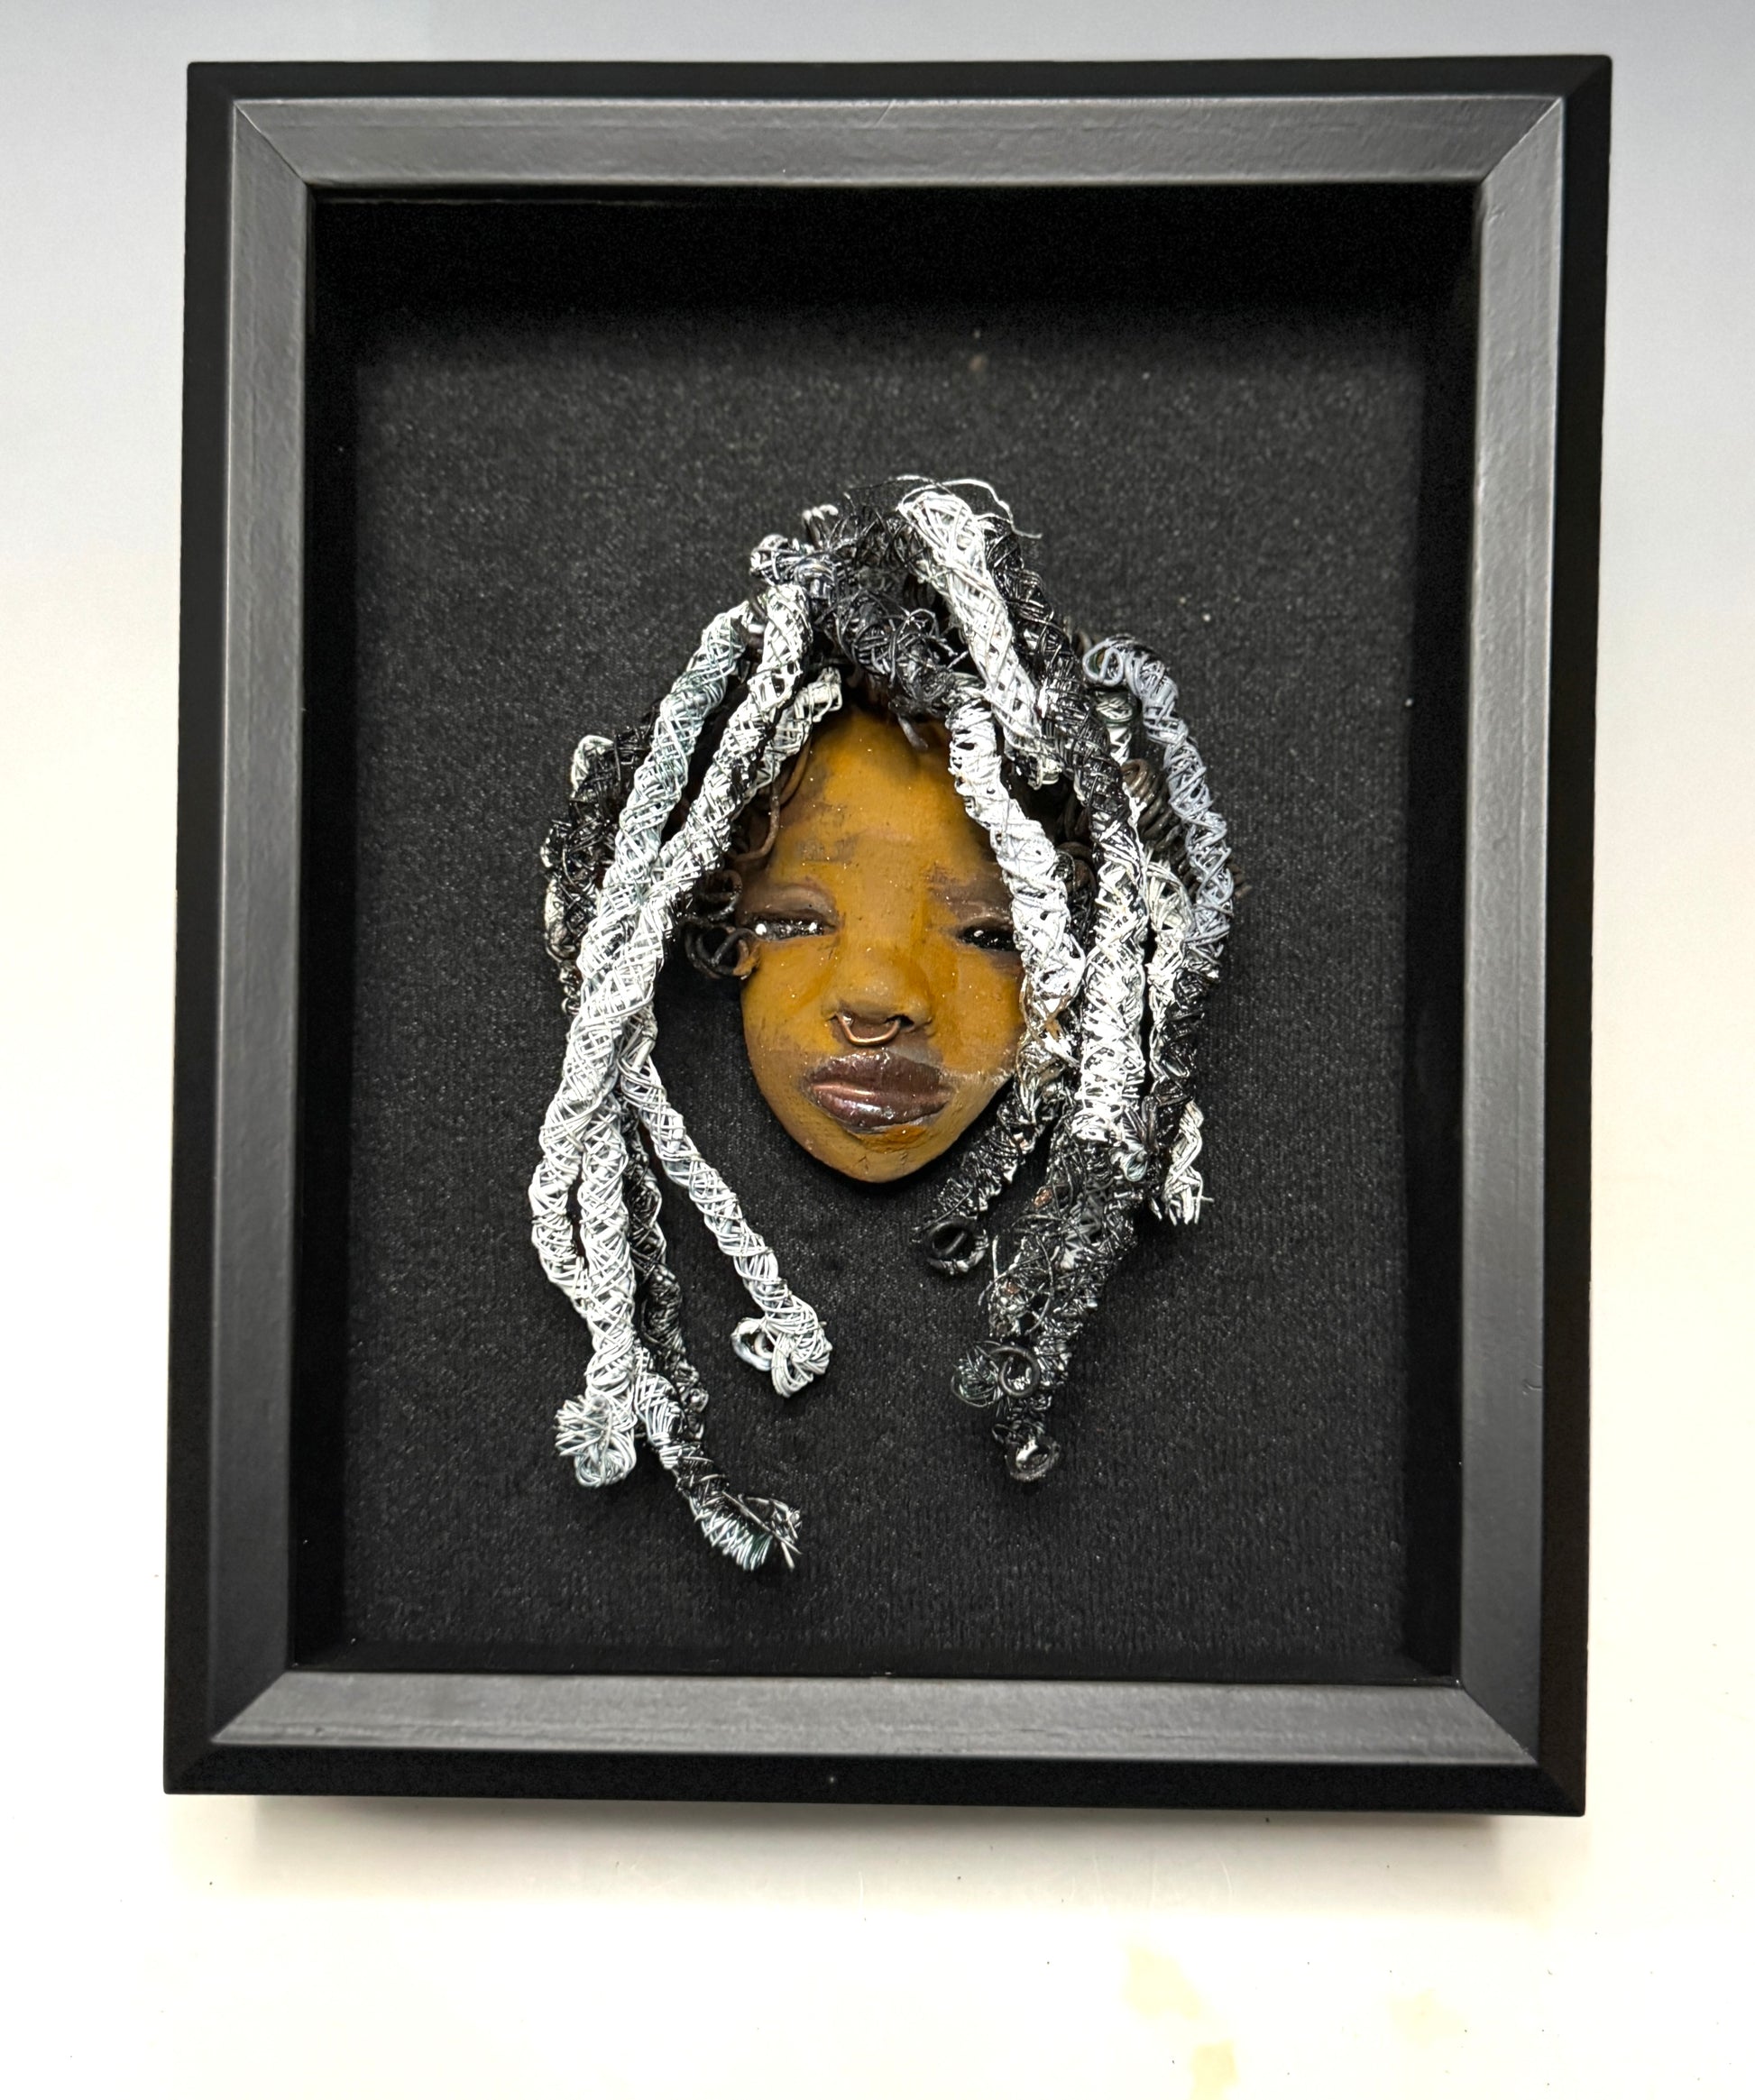 Weighing 5 oz and with a diameter of 3" by 7", Bailey Rae adds a hint of elegance to any wall, tree or shadowbox. Her black and white braids, honey brown complexion and copper-colored lips make her the perfect first piece from the HerDew mask collection. Shadow box not included with Bailey Rae purchase.